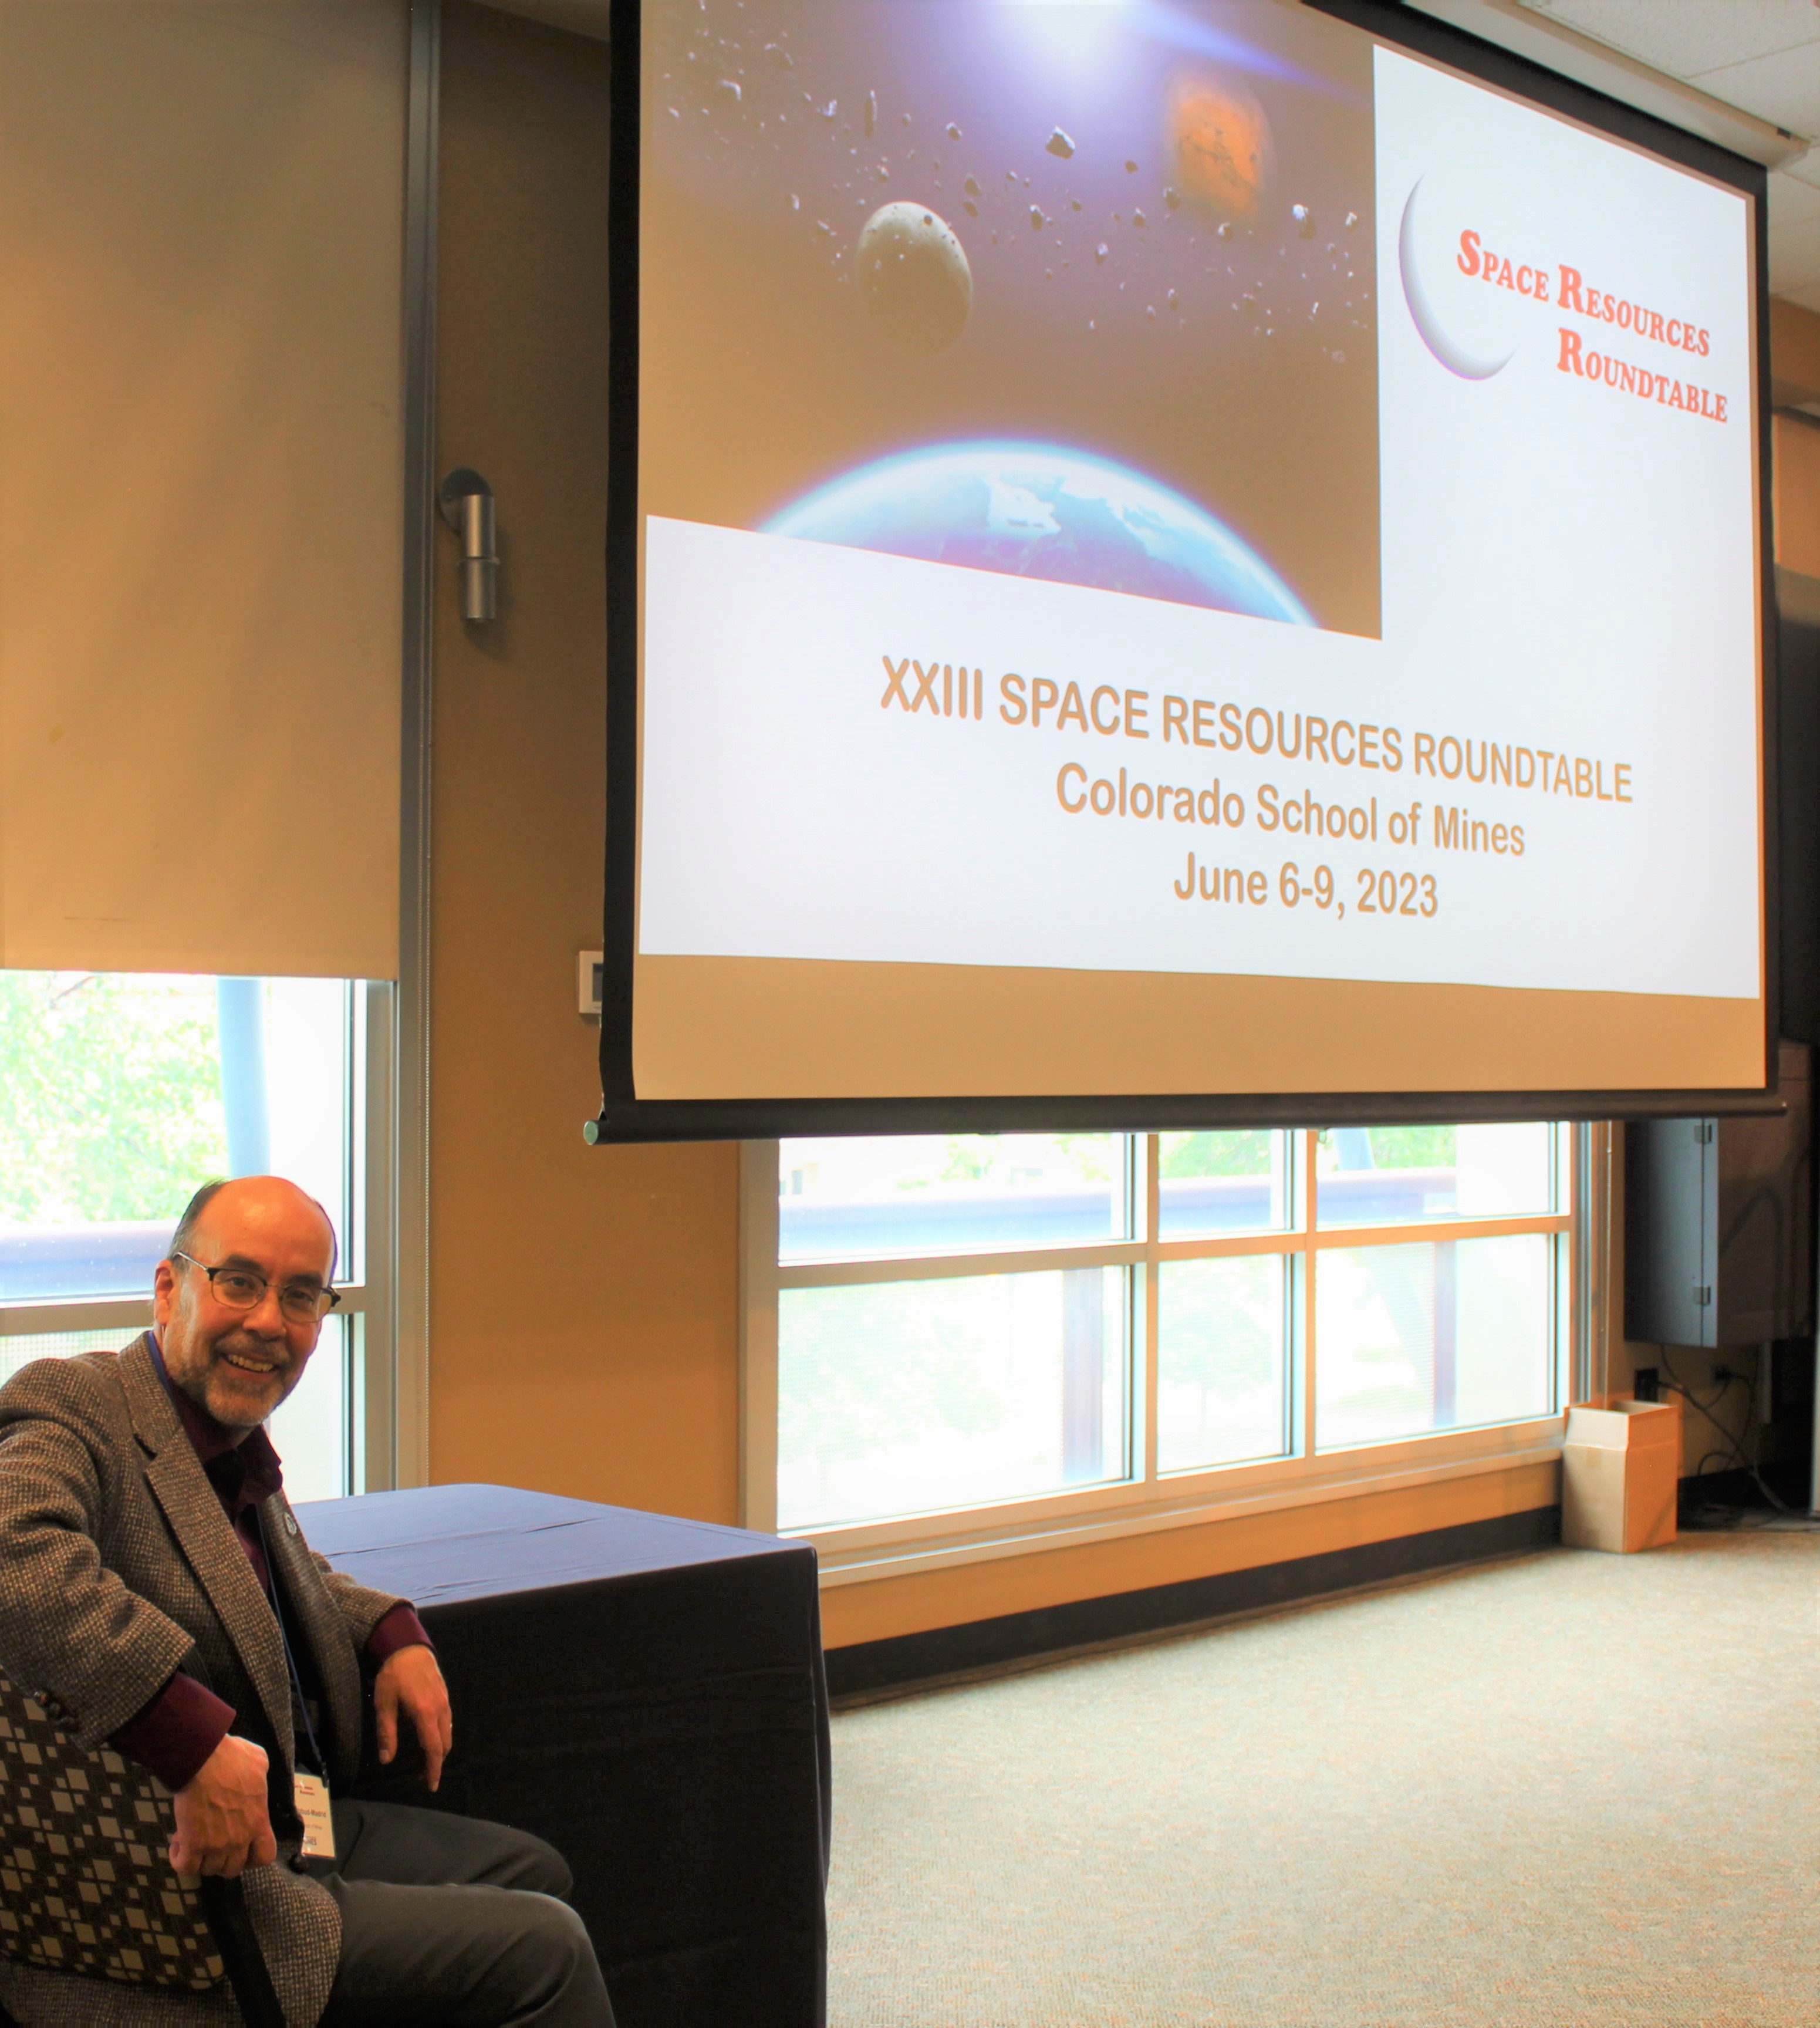 A man sits to the side of a projection screen featuring a space resources slide.